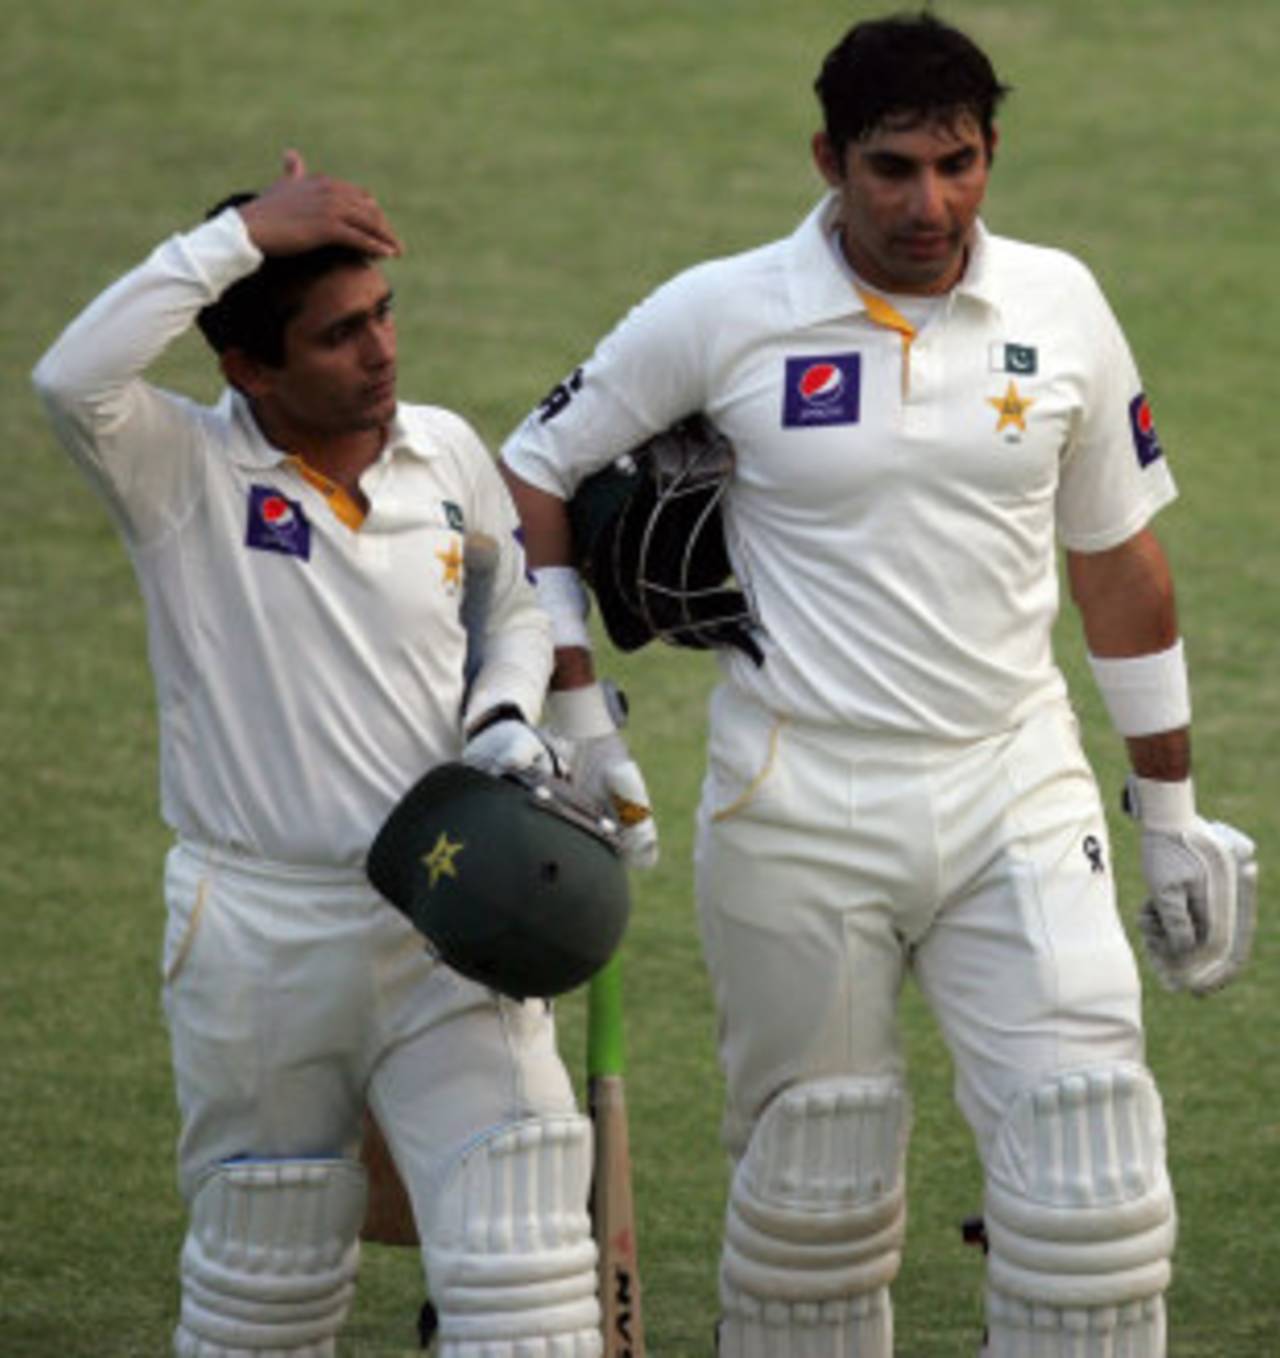 Misbah-ul-Haq and Adnan Akmal walk off the pitch at the end of the day, Zimbabwe v Pakistan, 2nd Test, Harare, 4th day, September 13, 2013